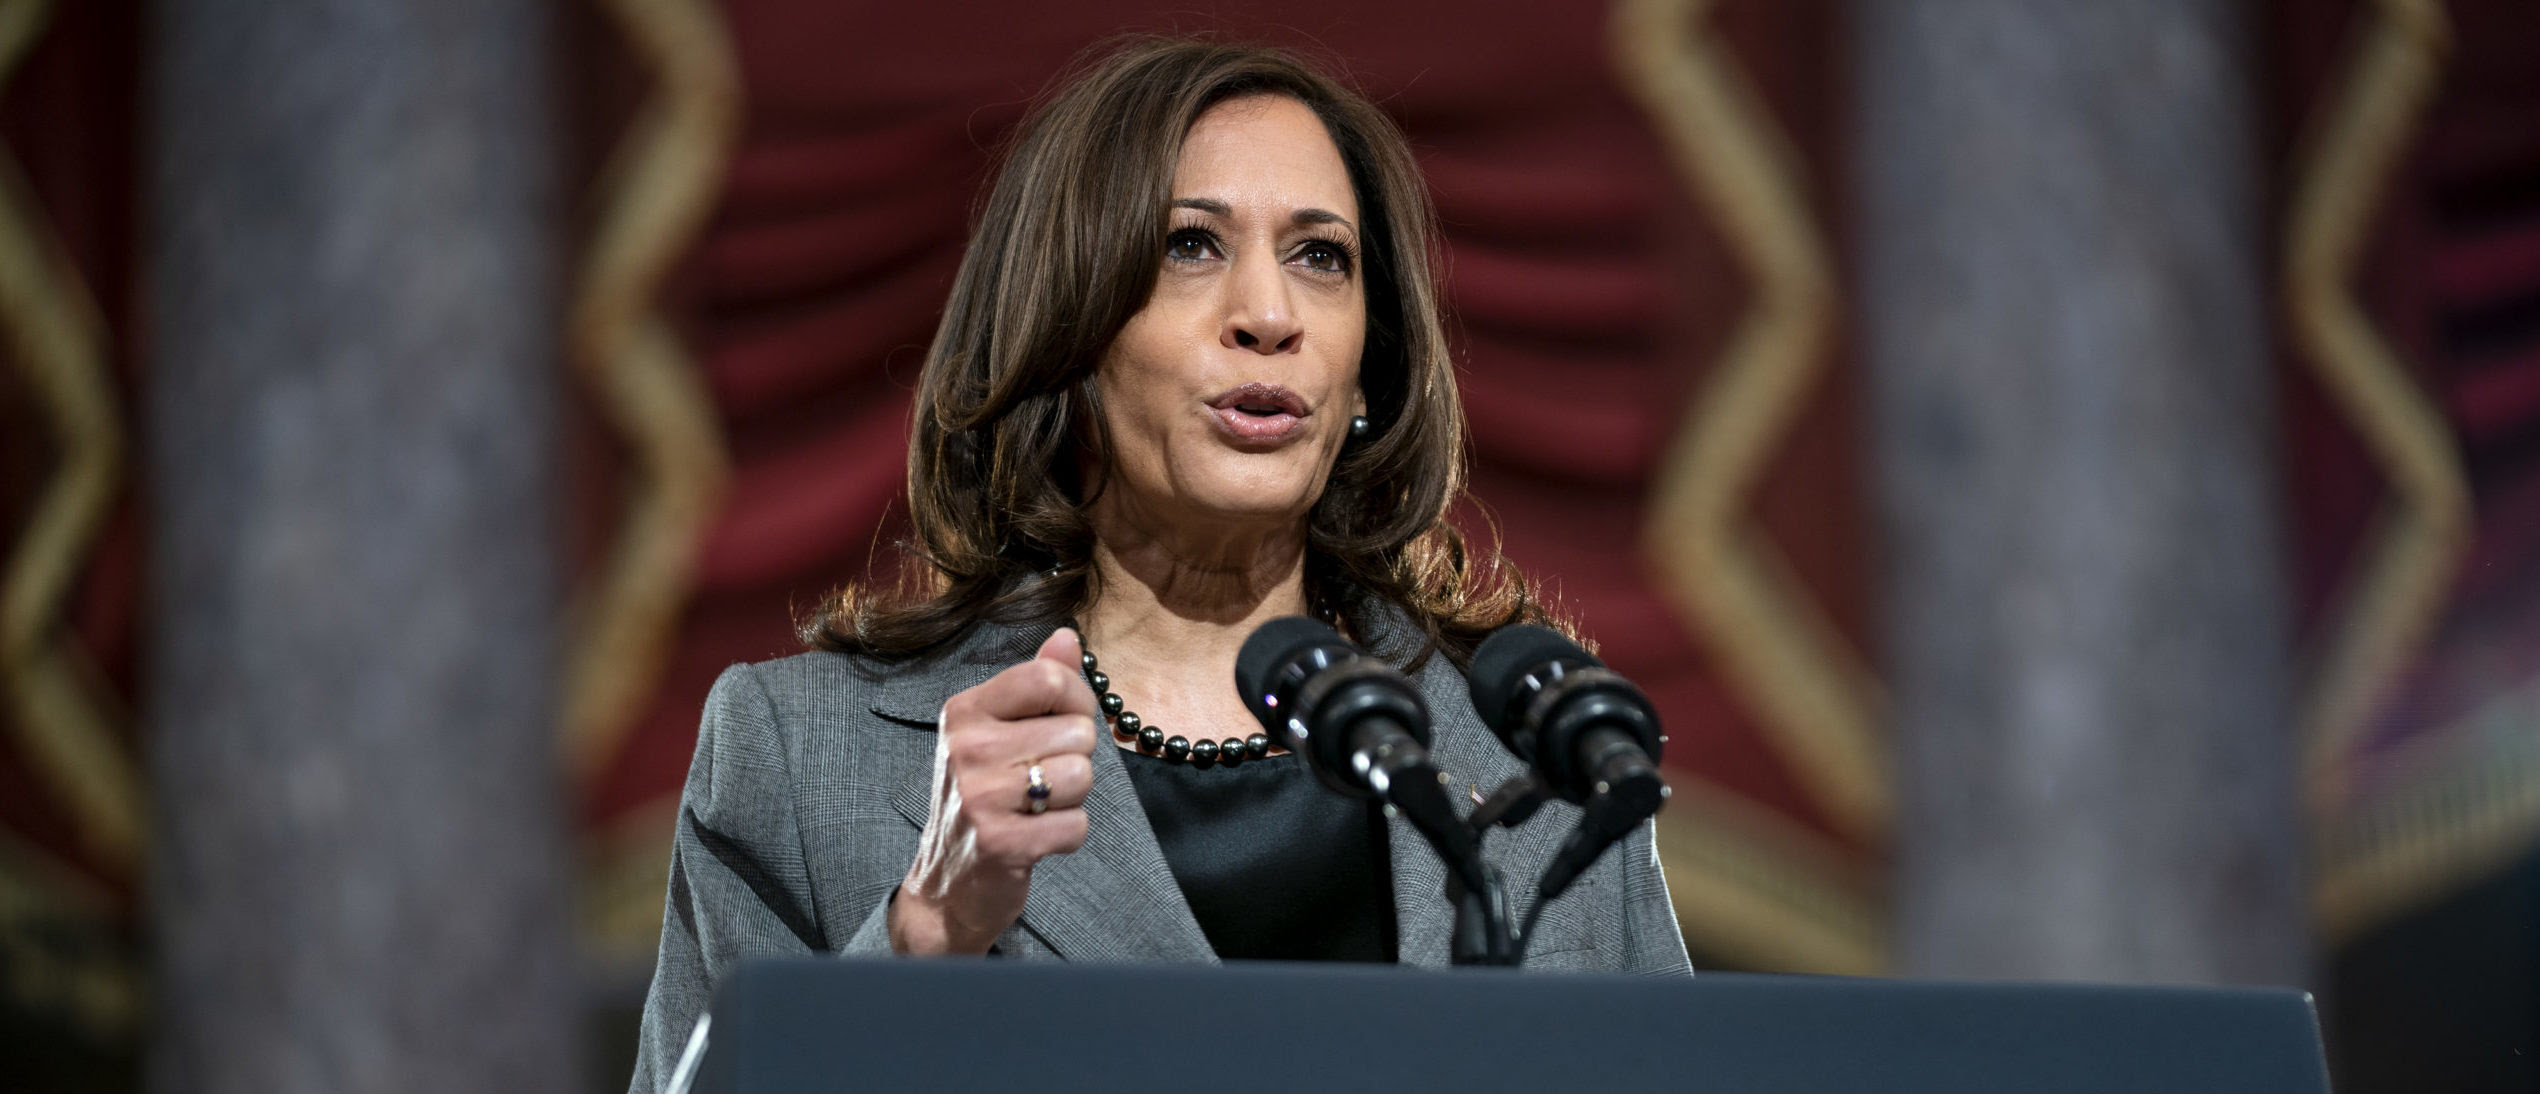 Harris Compares Jan. 6 To September 11 And The Attack On Pearl Harbor